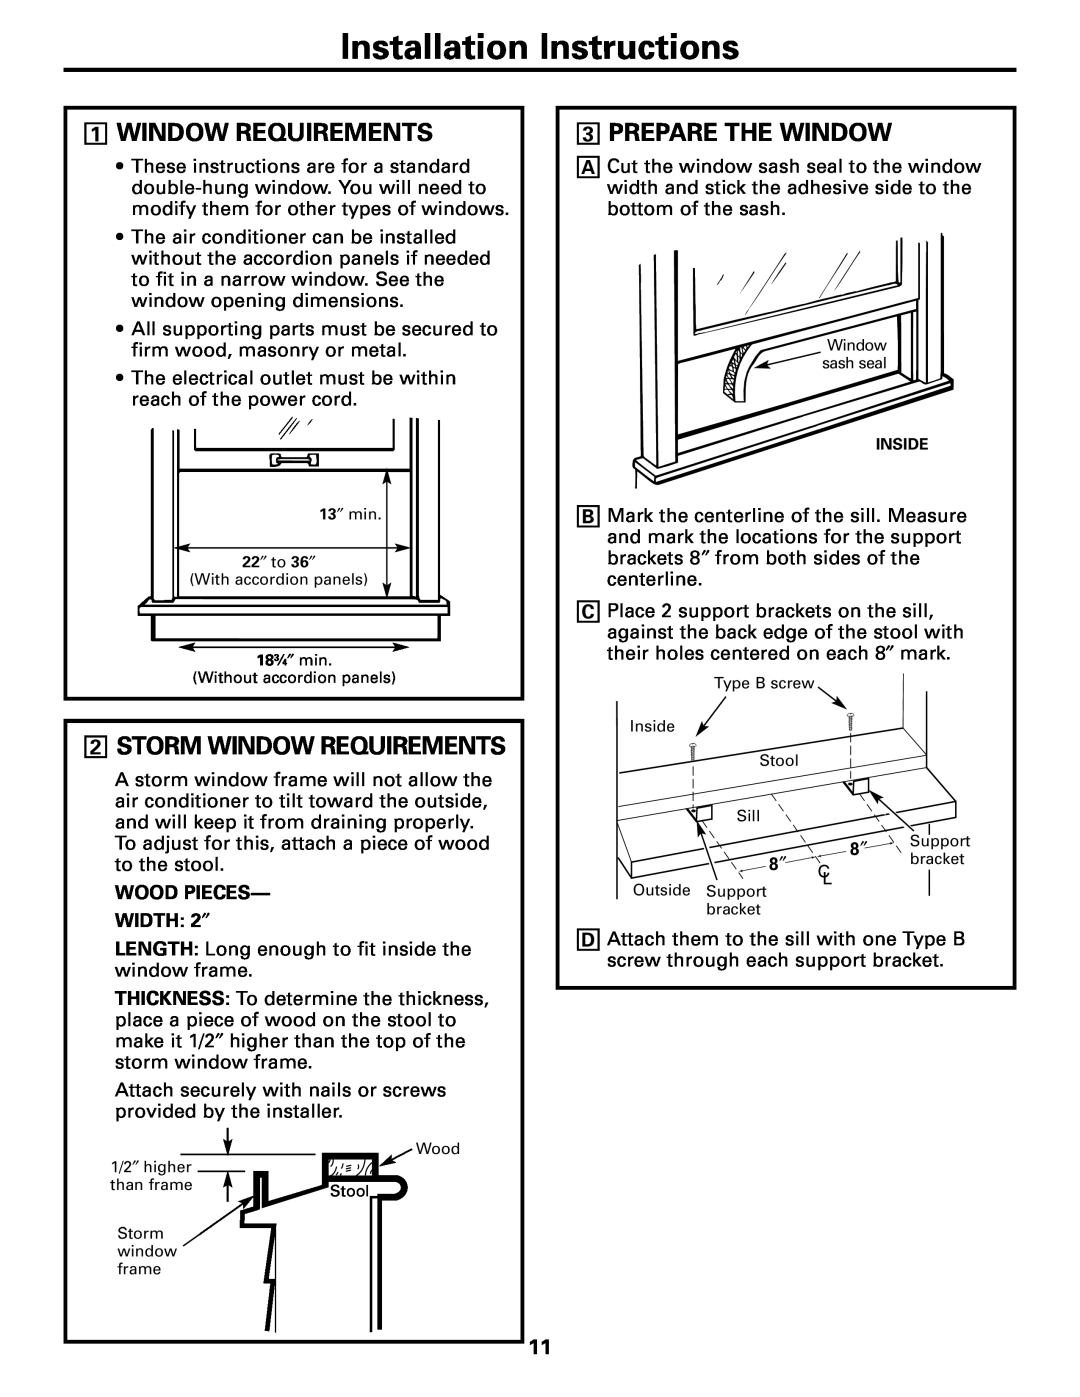 GE AGF05 1WINDOW REQUIREMENTS, 2STORM WINDOW REQUIREMENTS, 3PREPARE THE WINDOW, Installation Instructions 